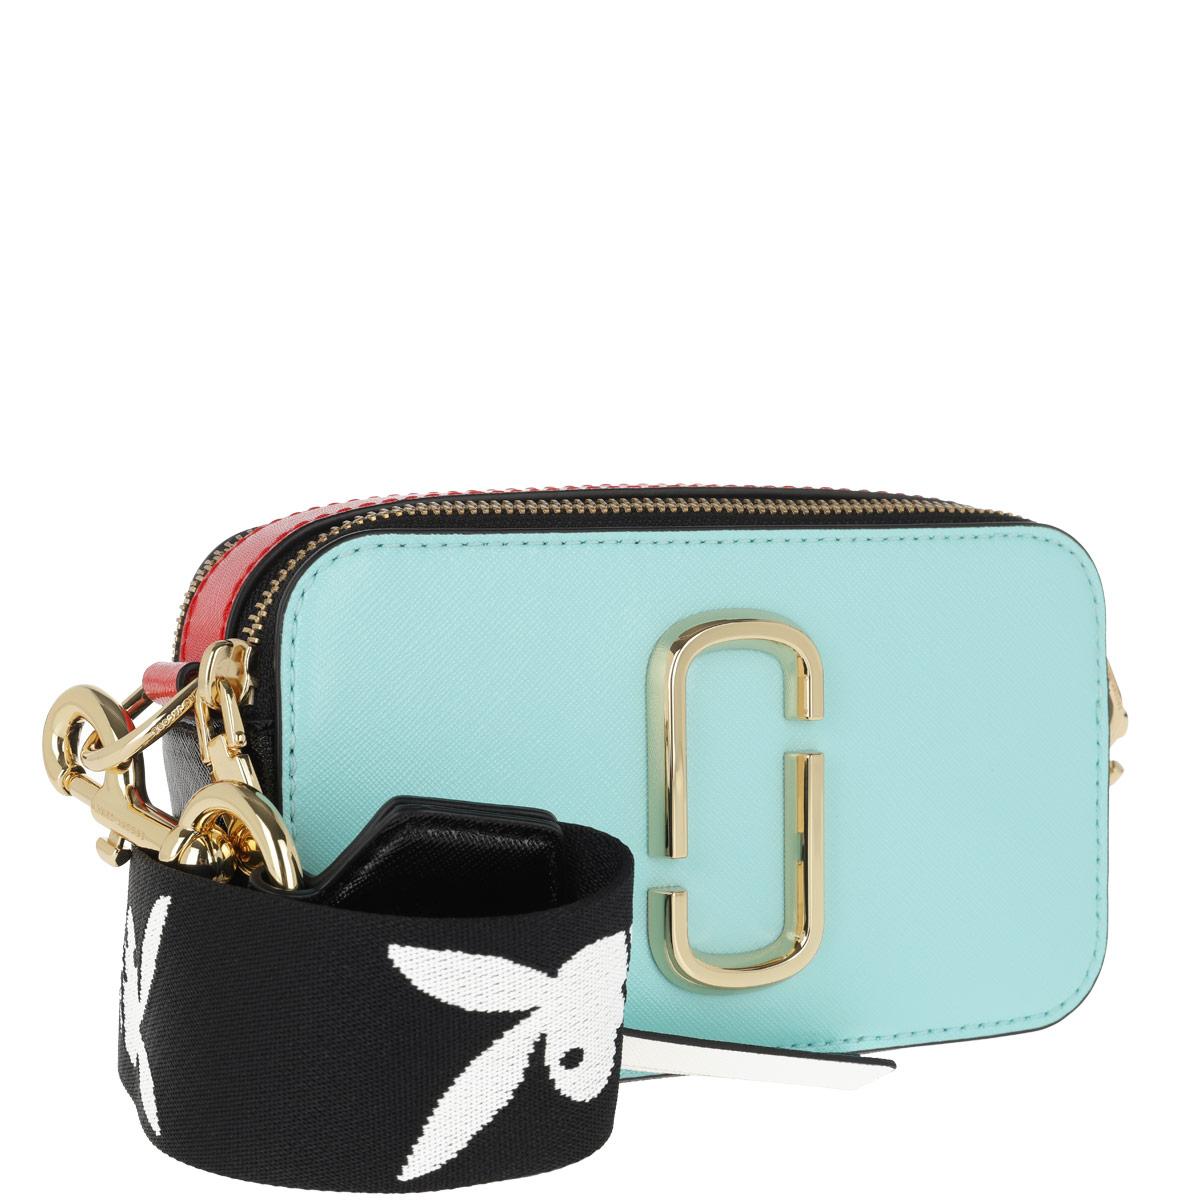 Marc Jacobs Snapshot Small Camera Bag Turquoise at FORZIERI